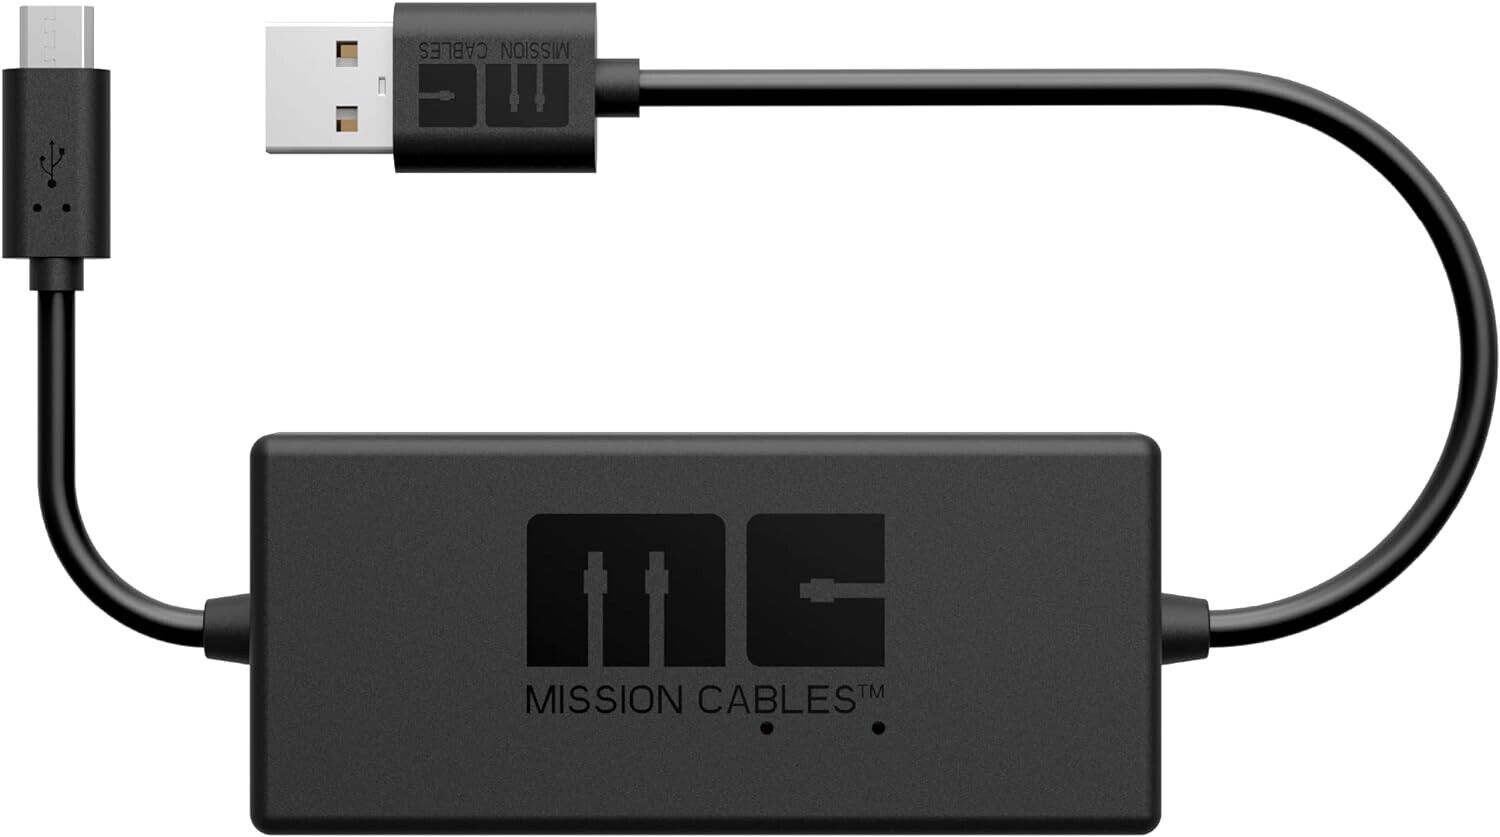 Mission Cables MC45 USB Power Cable for Amazon Fire TV Stick All Models